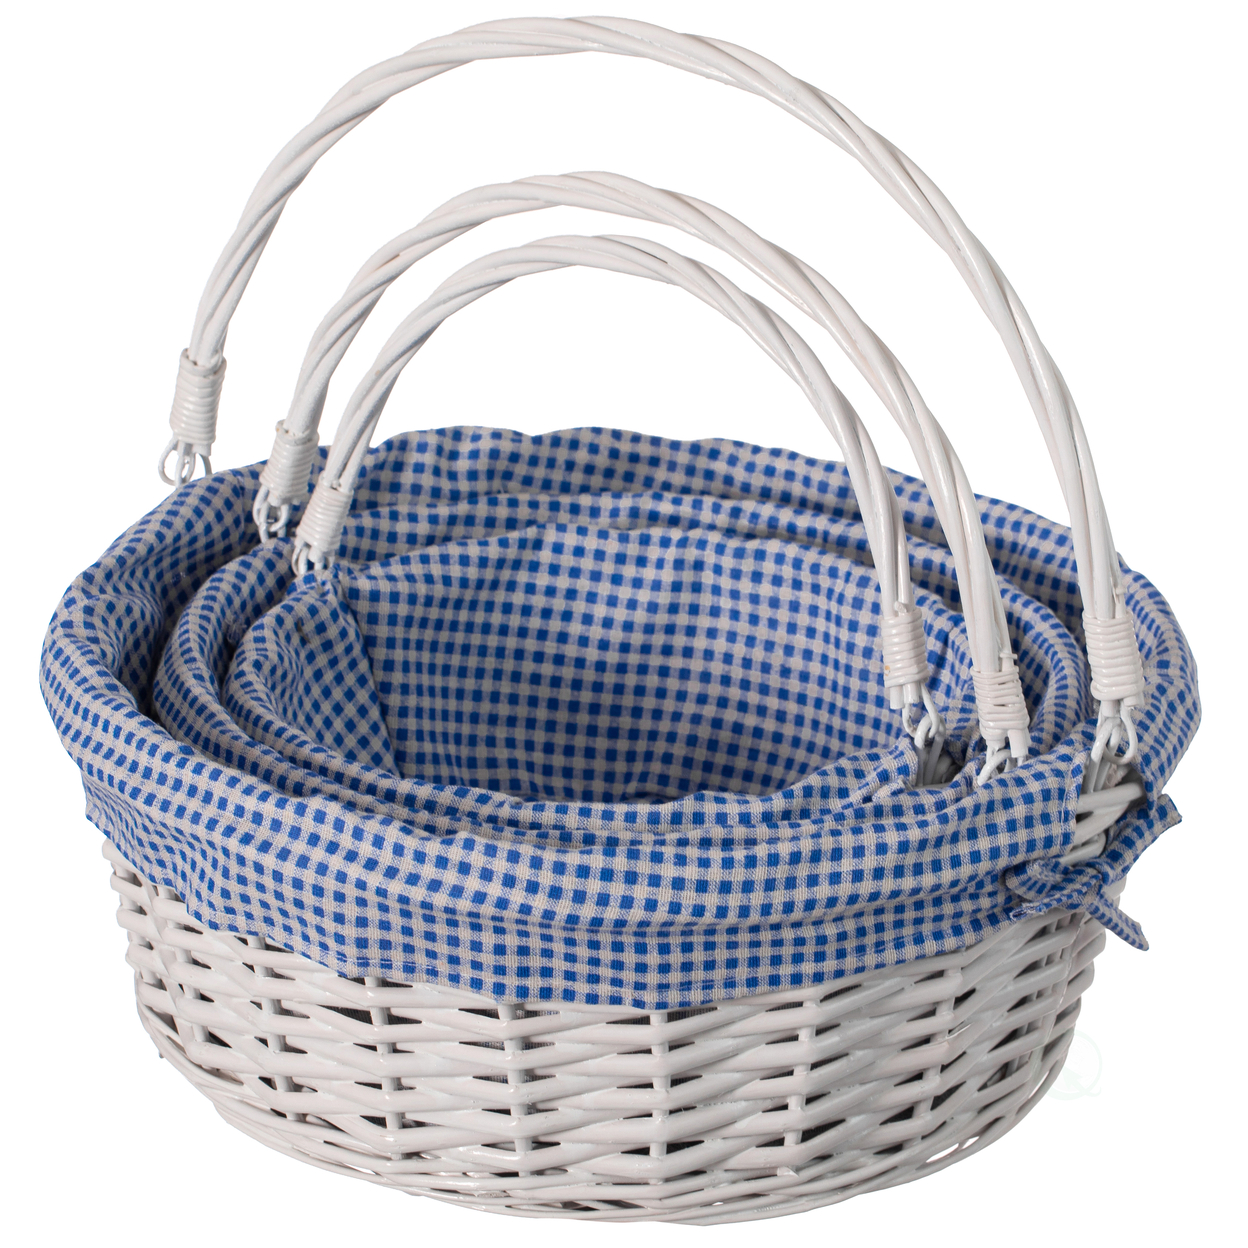 Traditional White Round Willow Gift Basket With Gingham Liner And Sturdy Foldable Handles, Food Snacks Storage Basket - Blue, Large